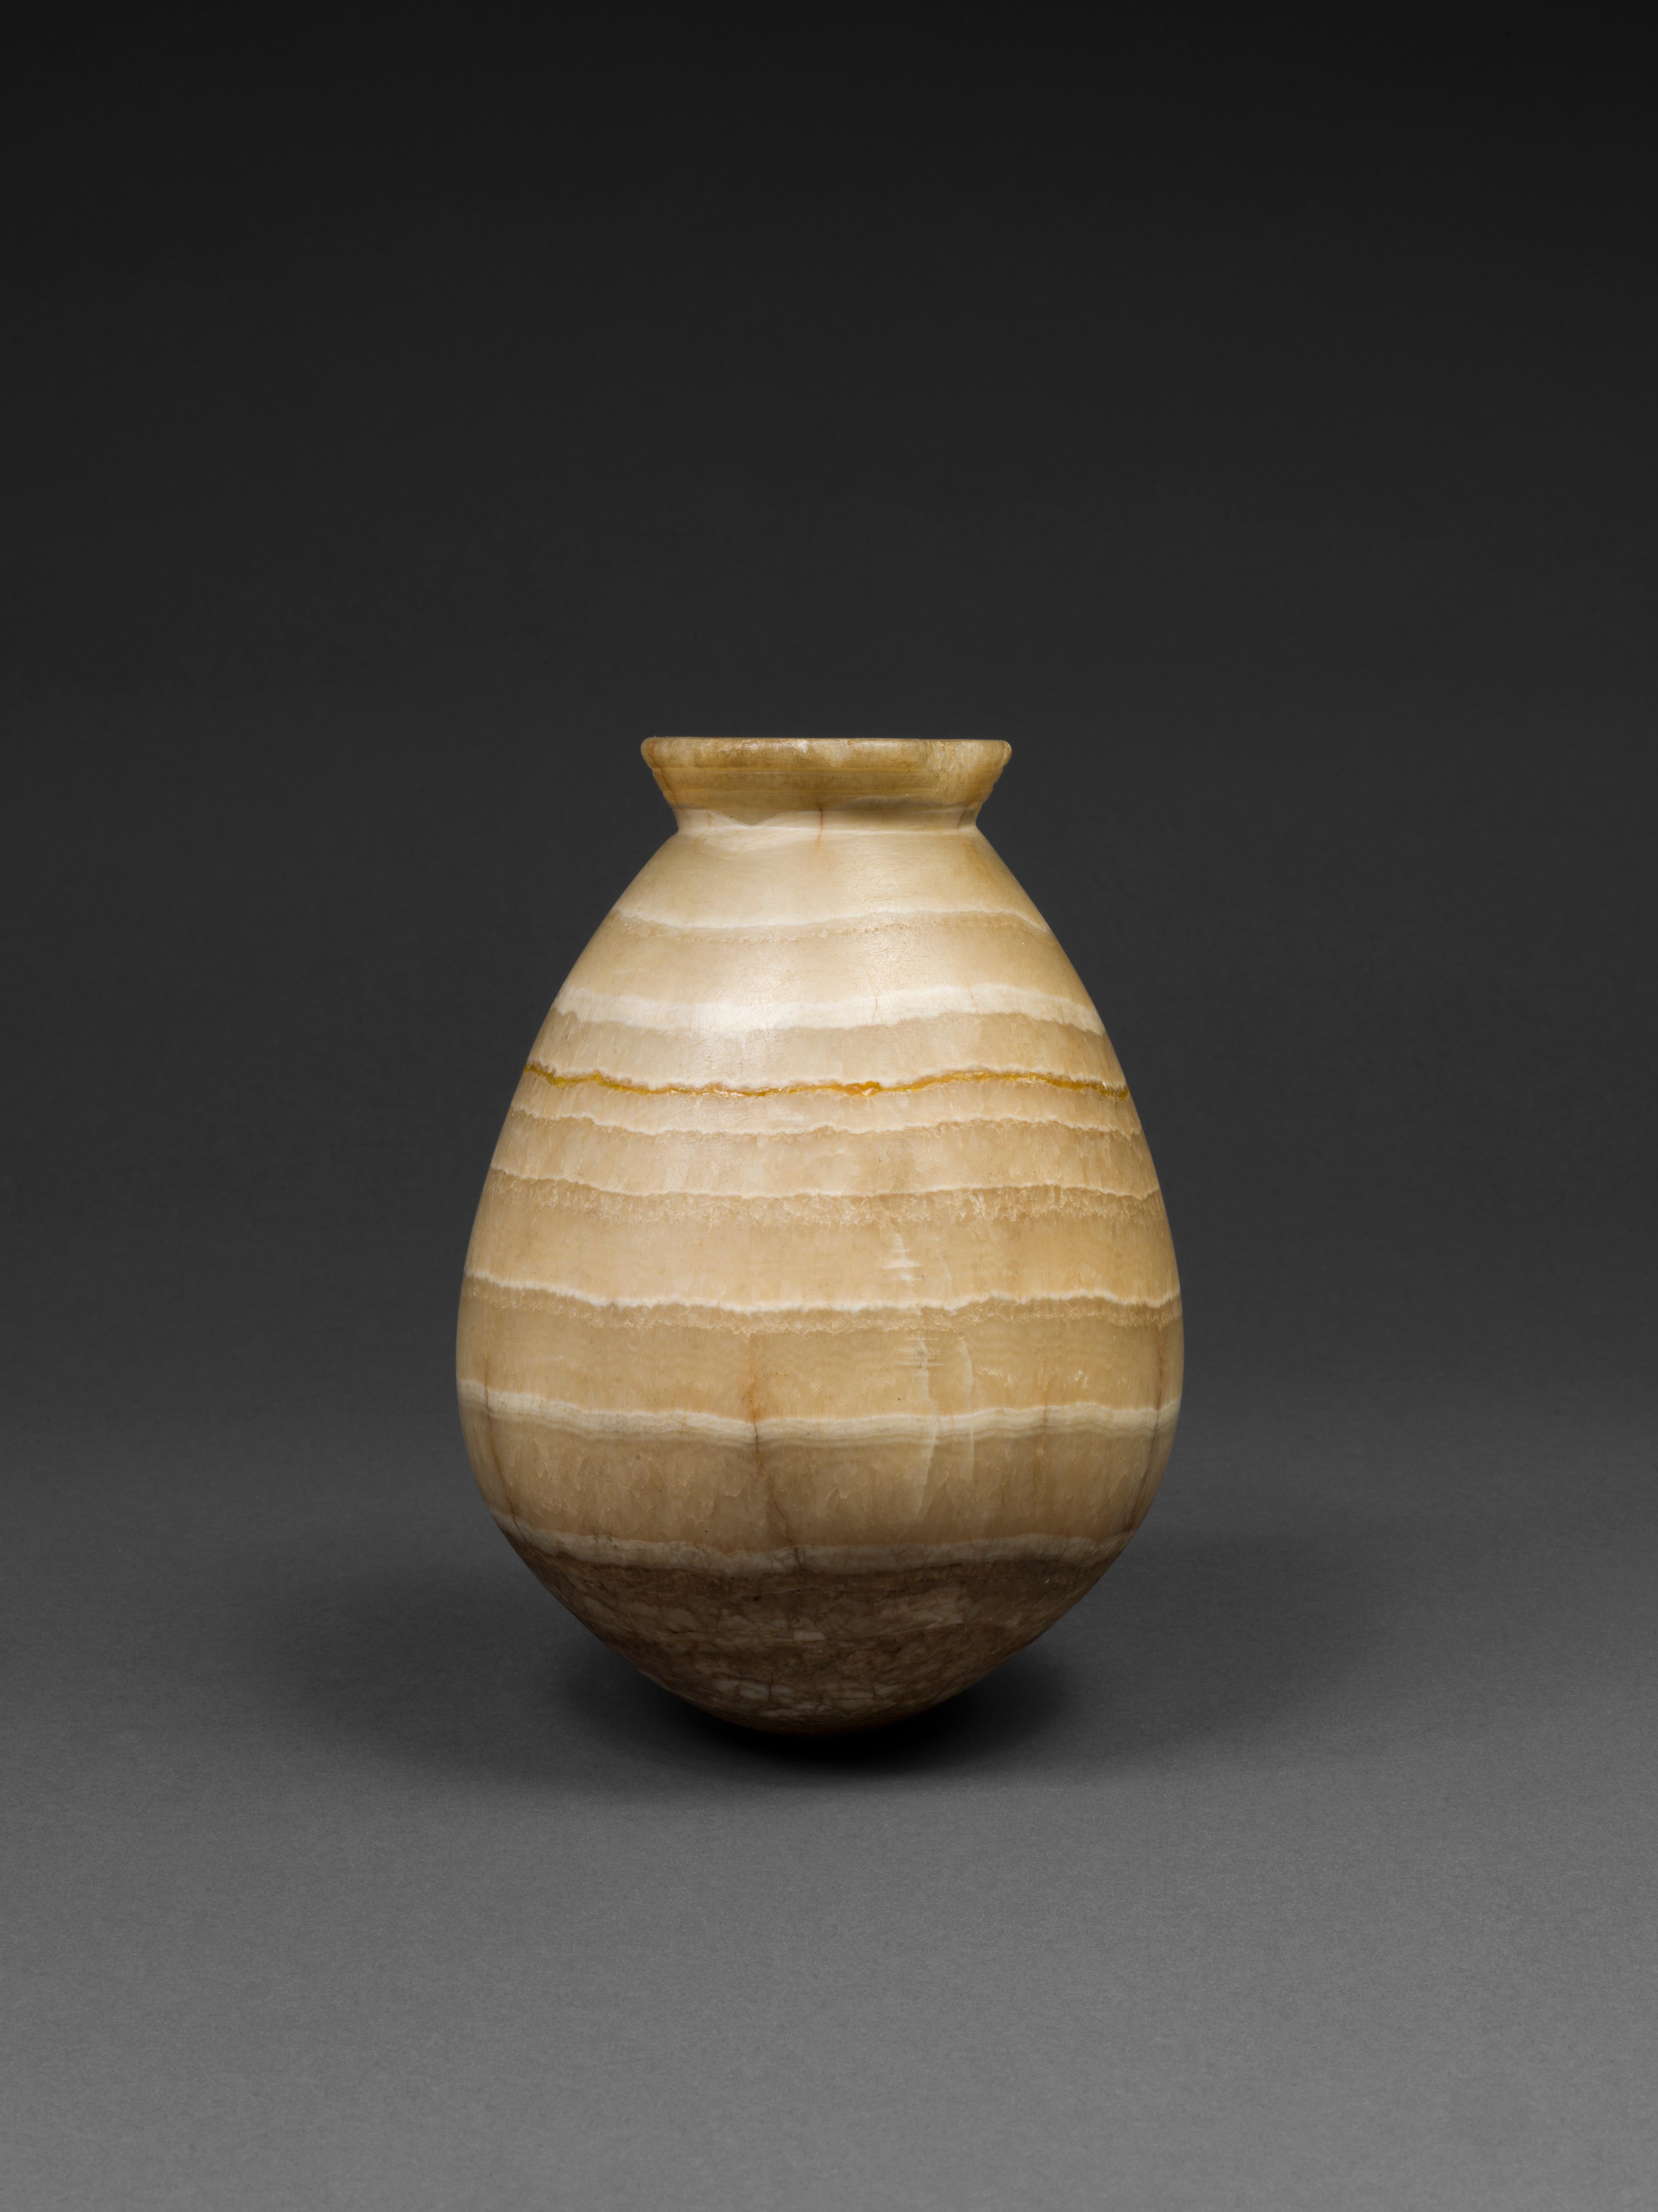 ANCIENT EGYPTIAN BANDED ALABASTER OLLA, 3RD MILLENNIUM B.C